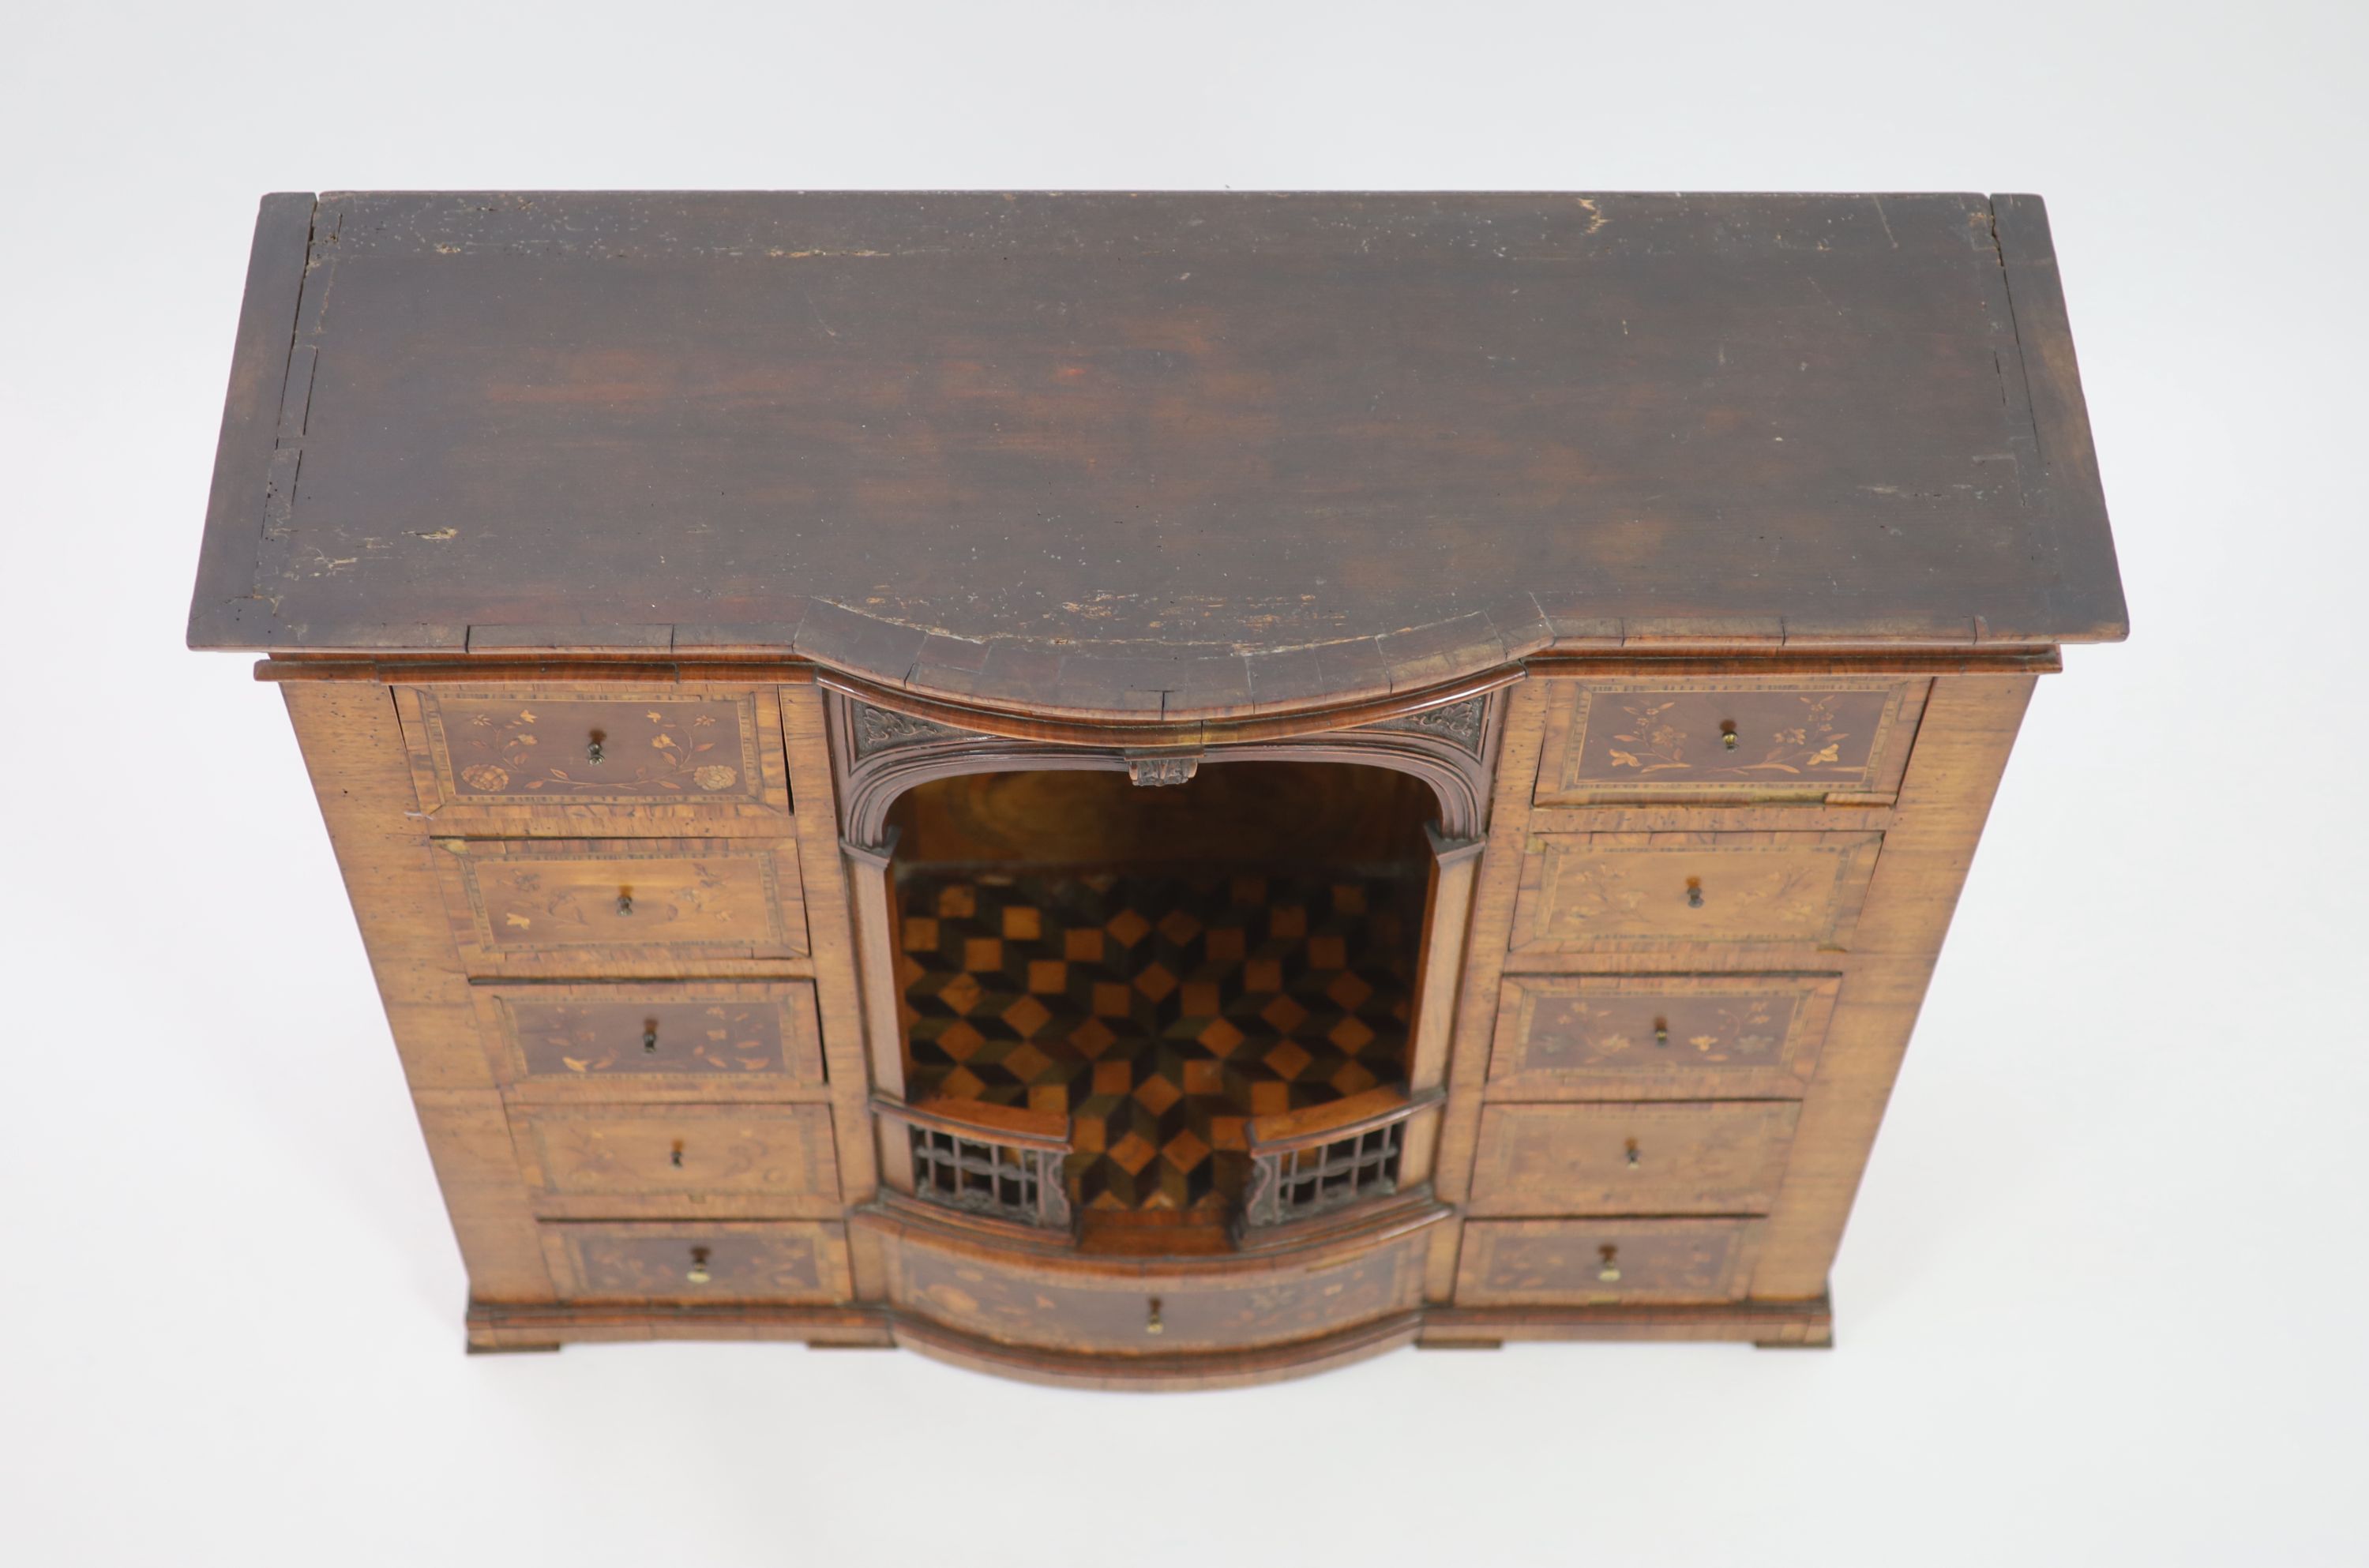 A late 18th century Dutch walnut and marquetry collectors cabinet W 88cm. D 32cm. H 77cm.